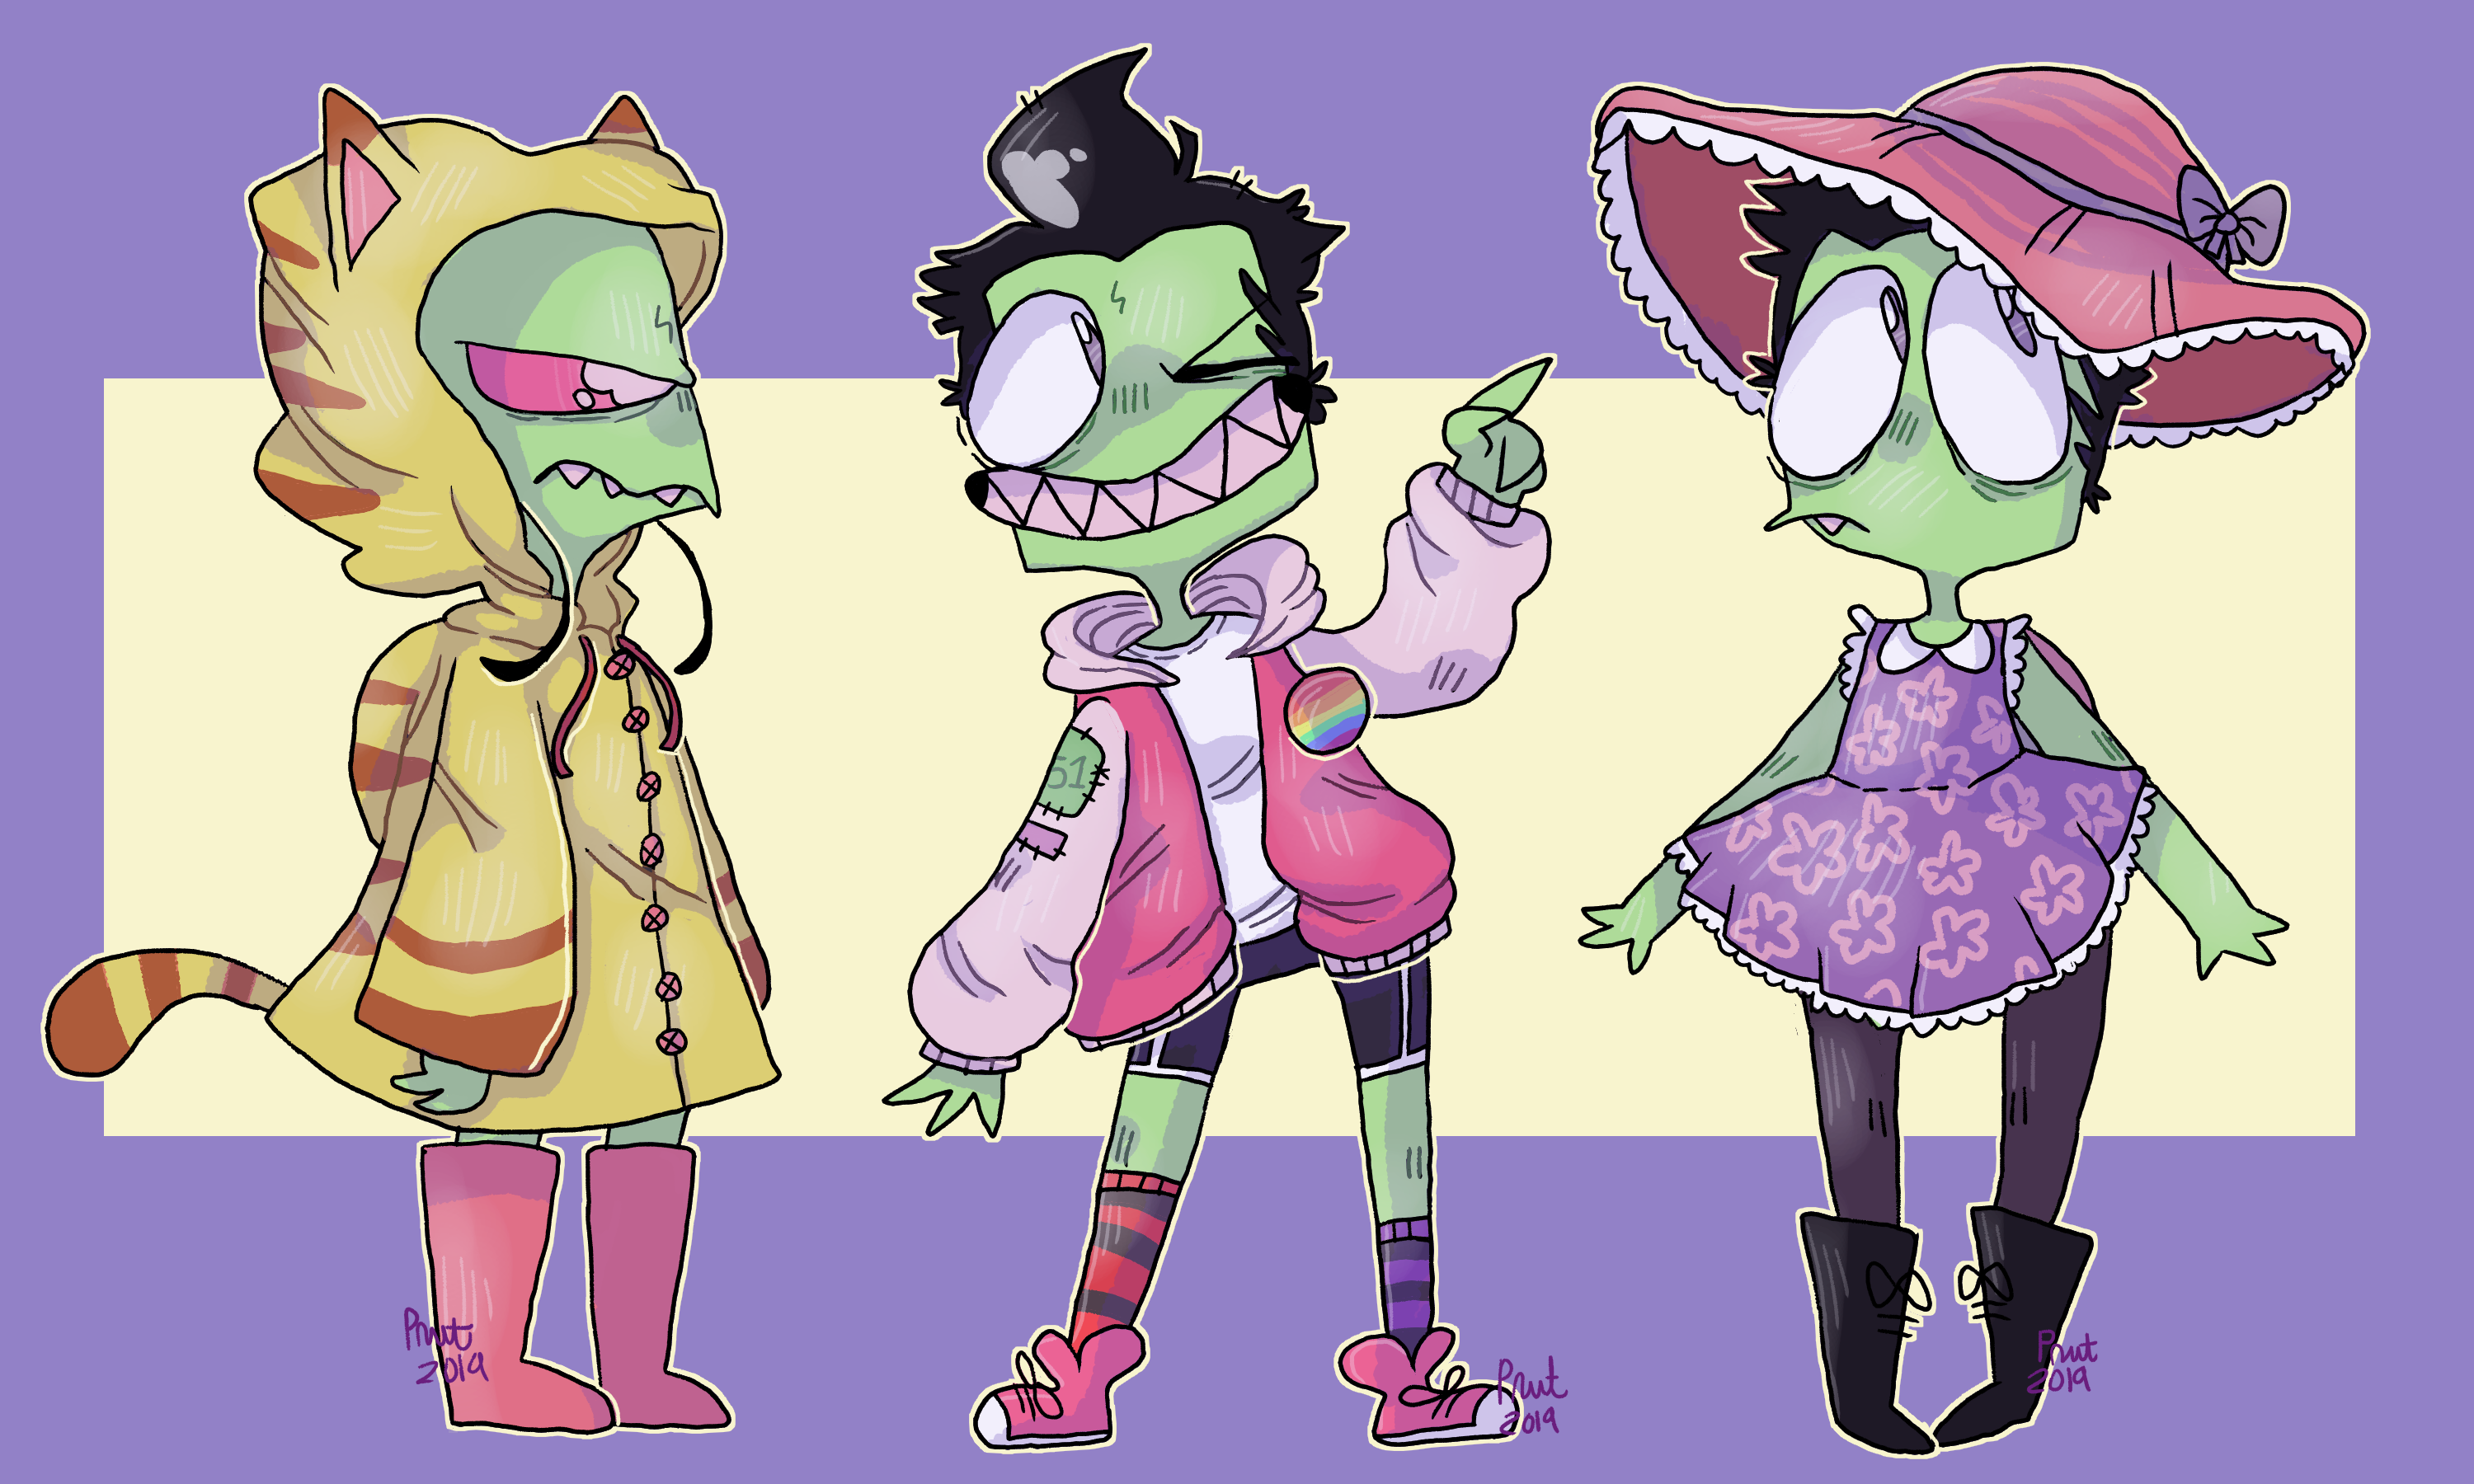 Zim Outfits 2 by peanutcat62 on DeviantArt